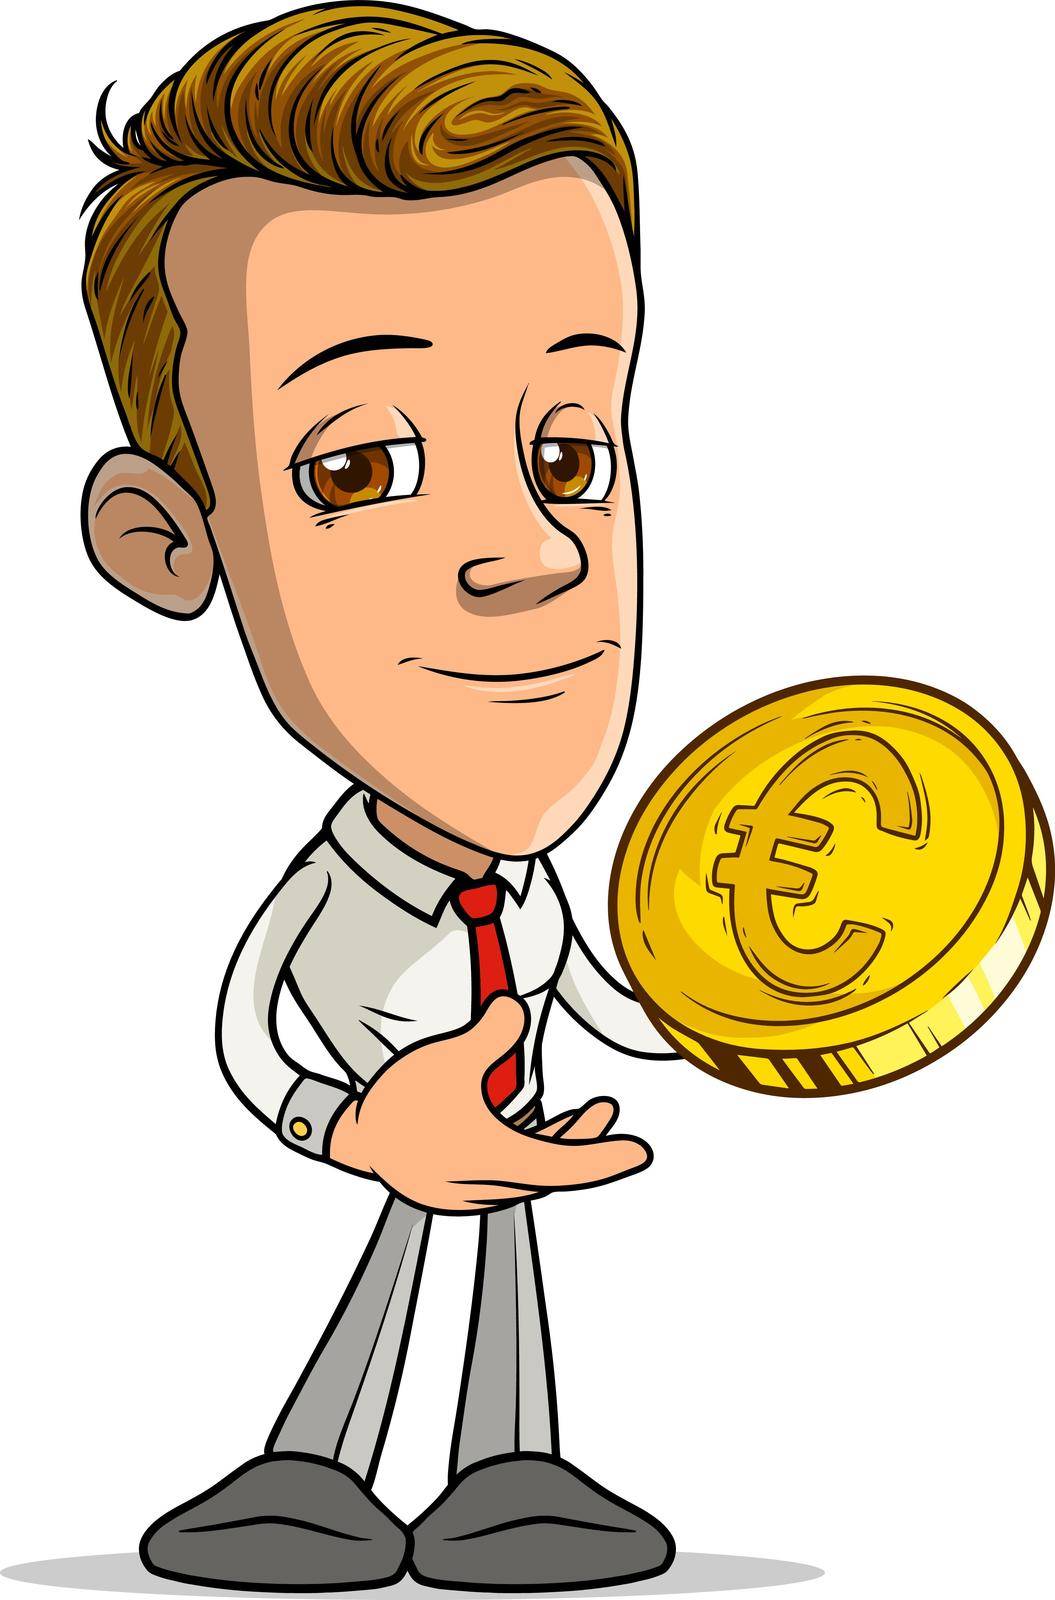 Cartoon smiling boy character with euro coin by GB_Art